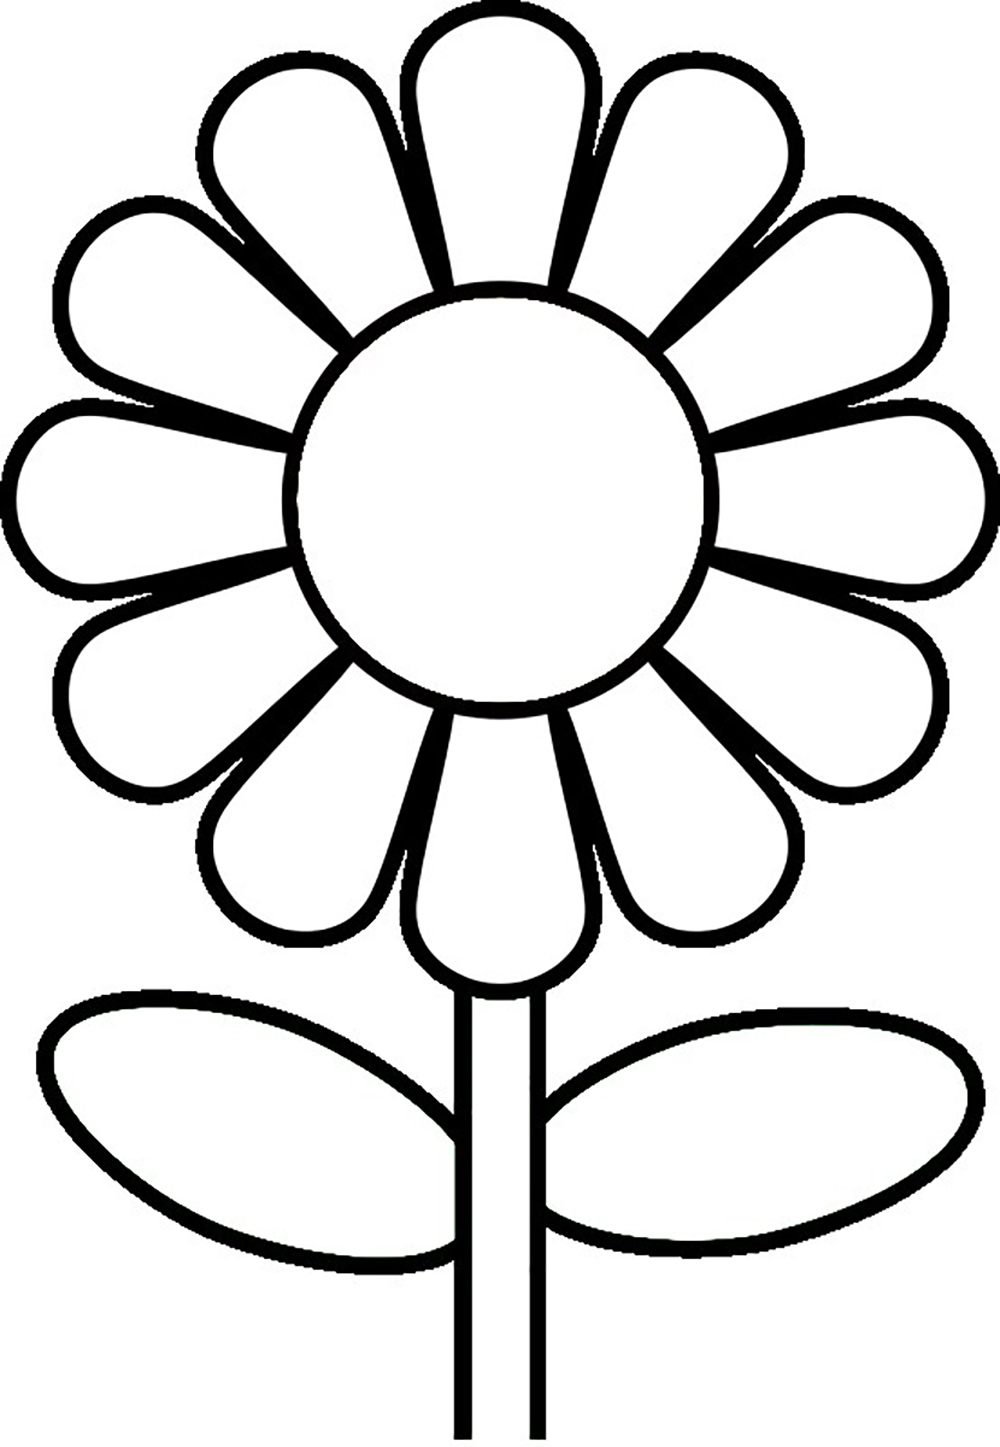 Attractive Flower Stems Coloring Pages For Kids #nh : Printable ...